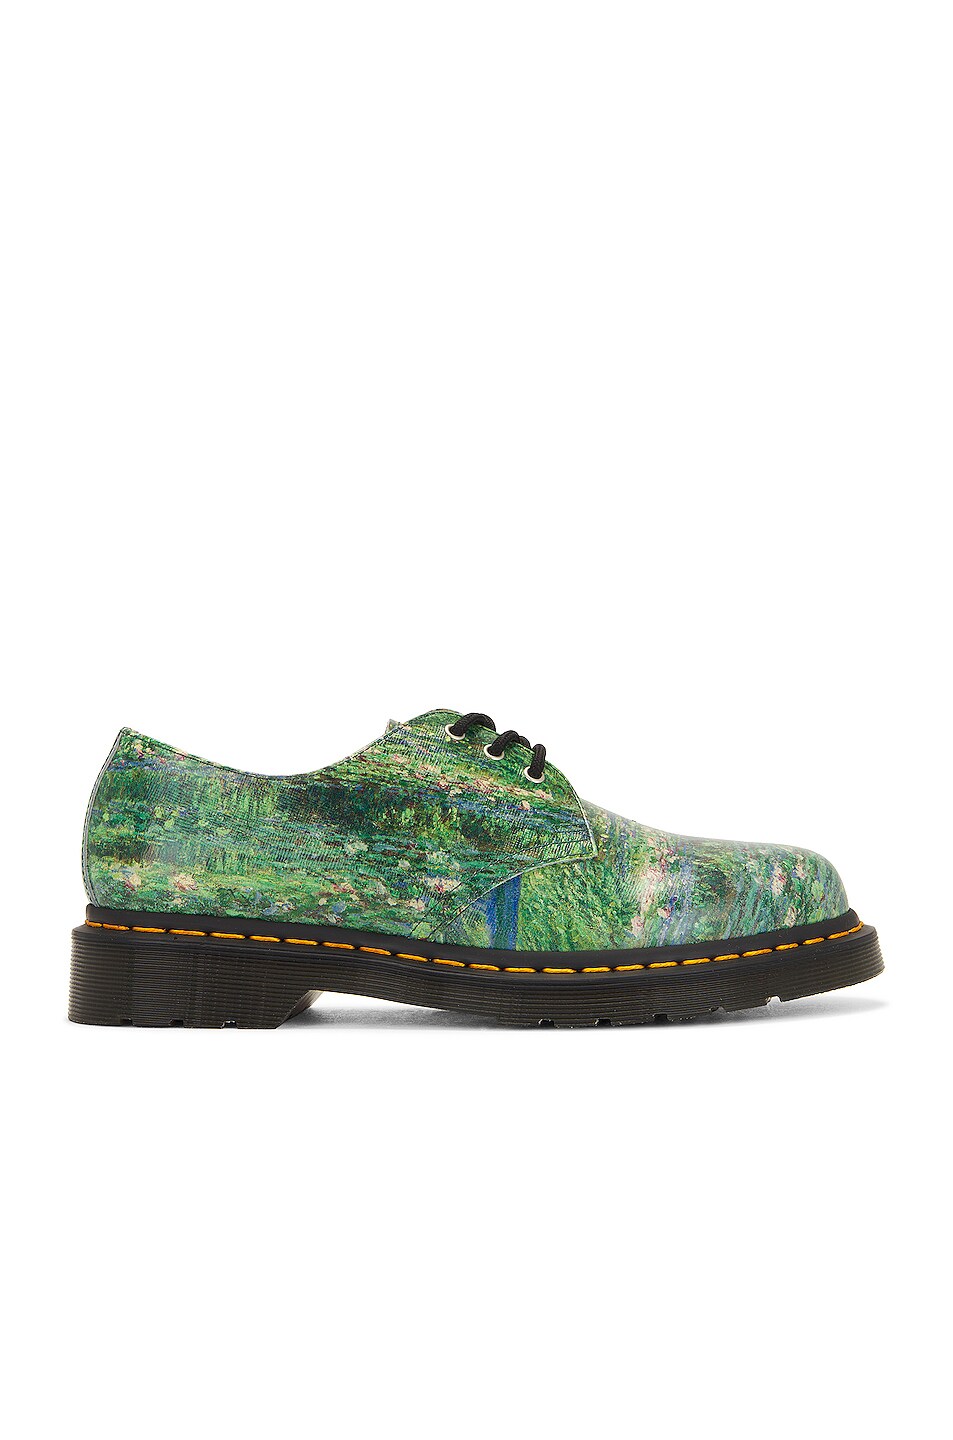 Image 1 of Dr. Martens x The National Gallery 1461 in Lily Pond